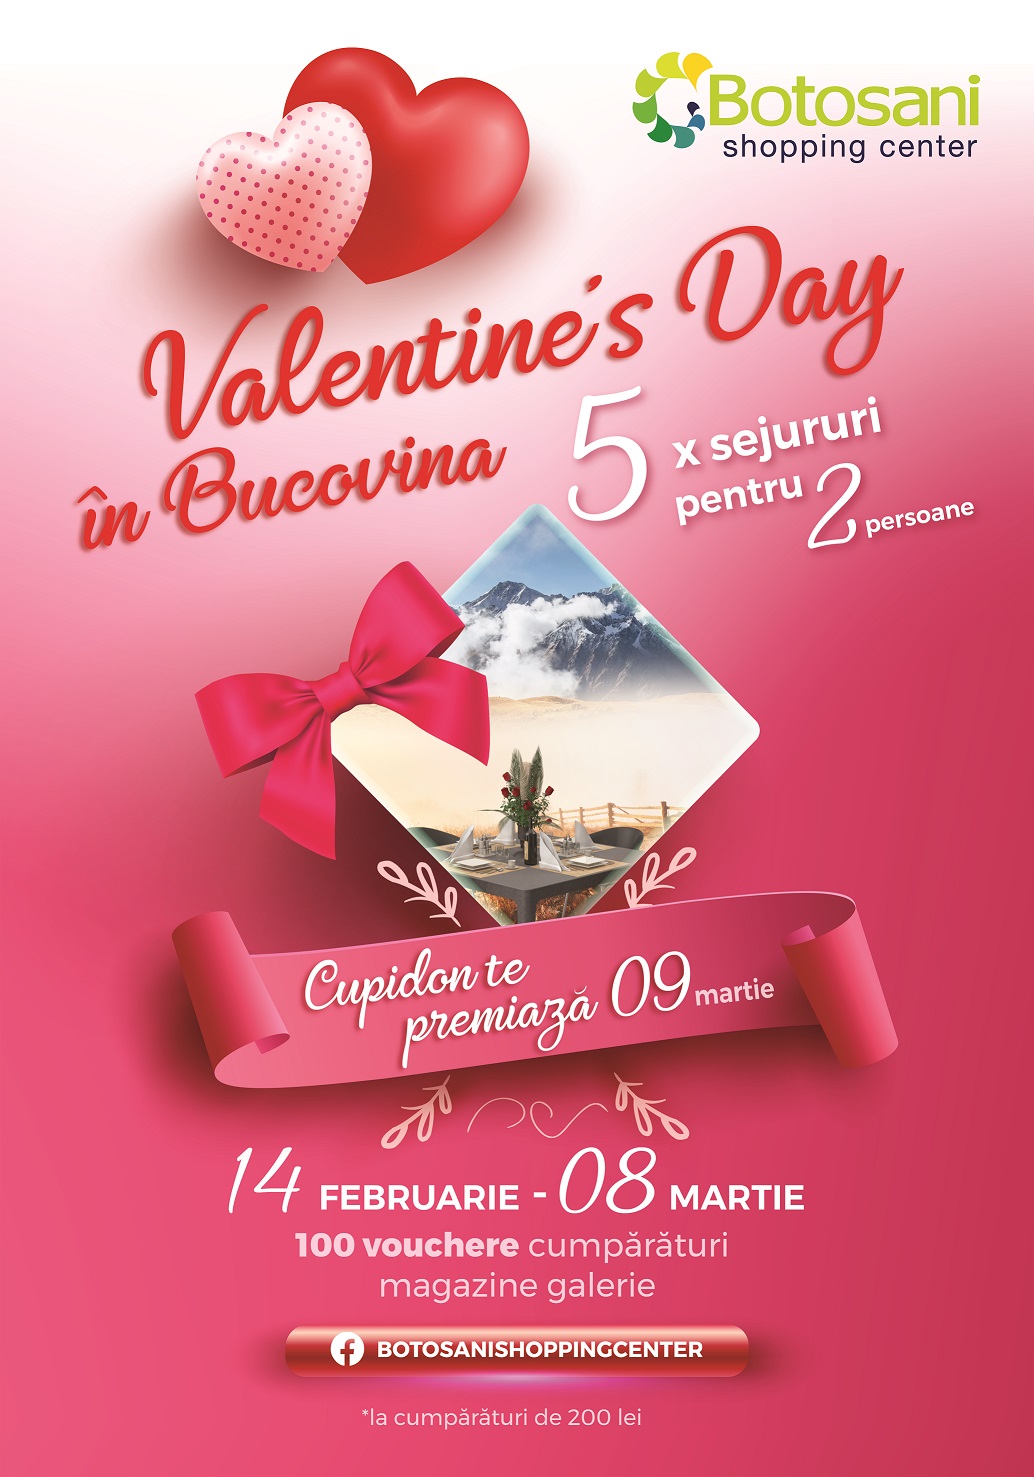 You are currently viewing Valentine’s Day in Bucovina!